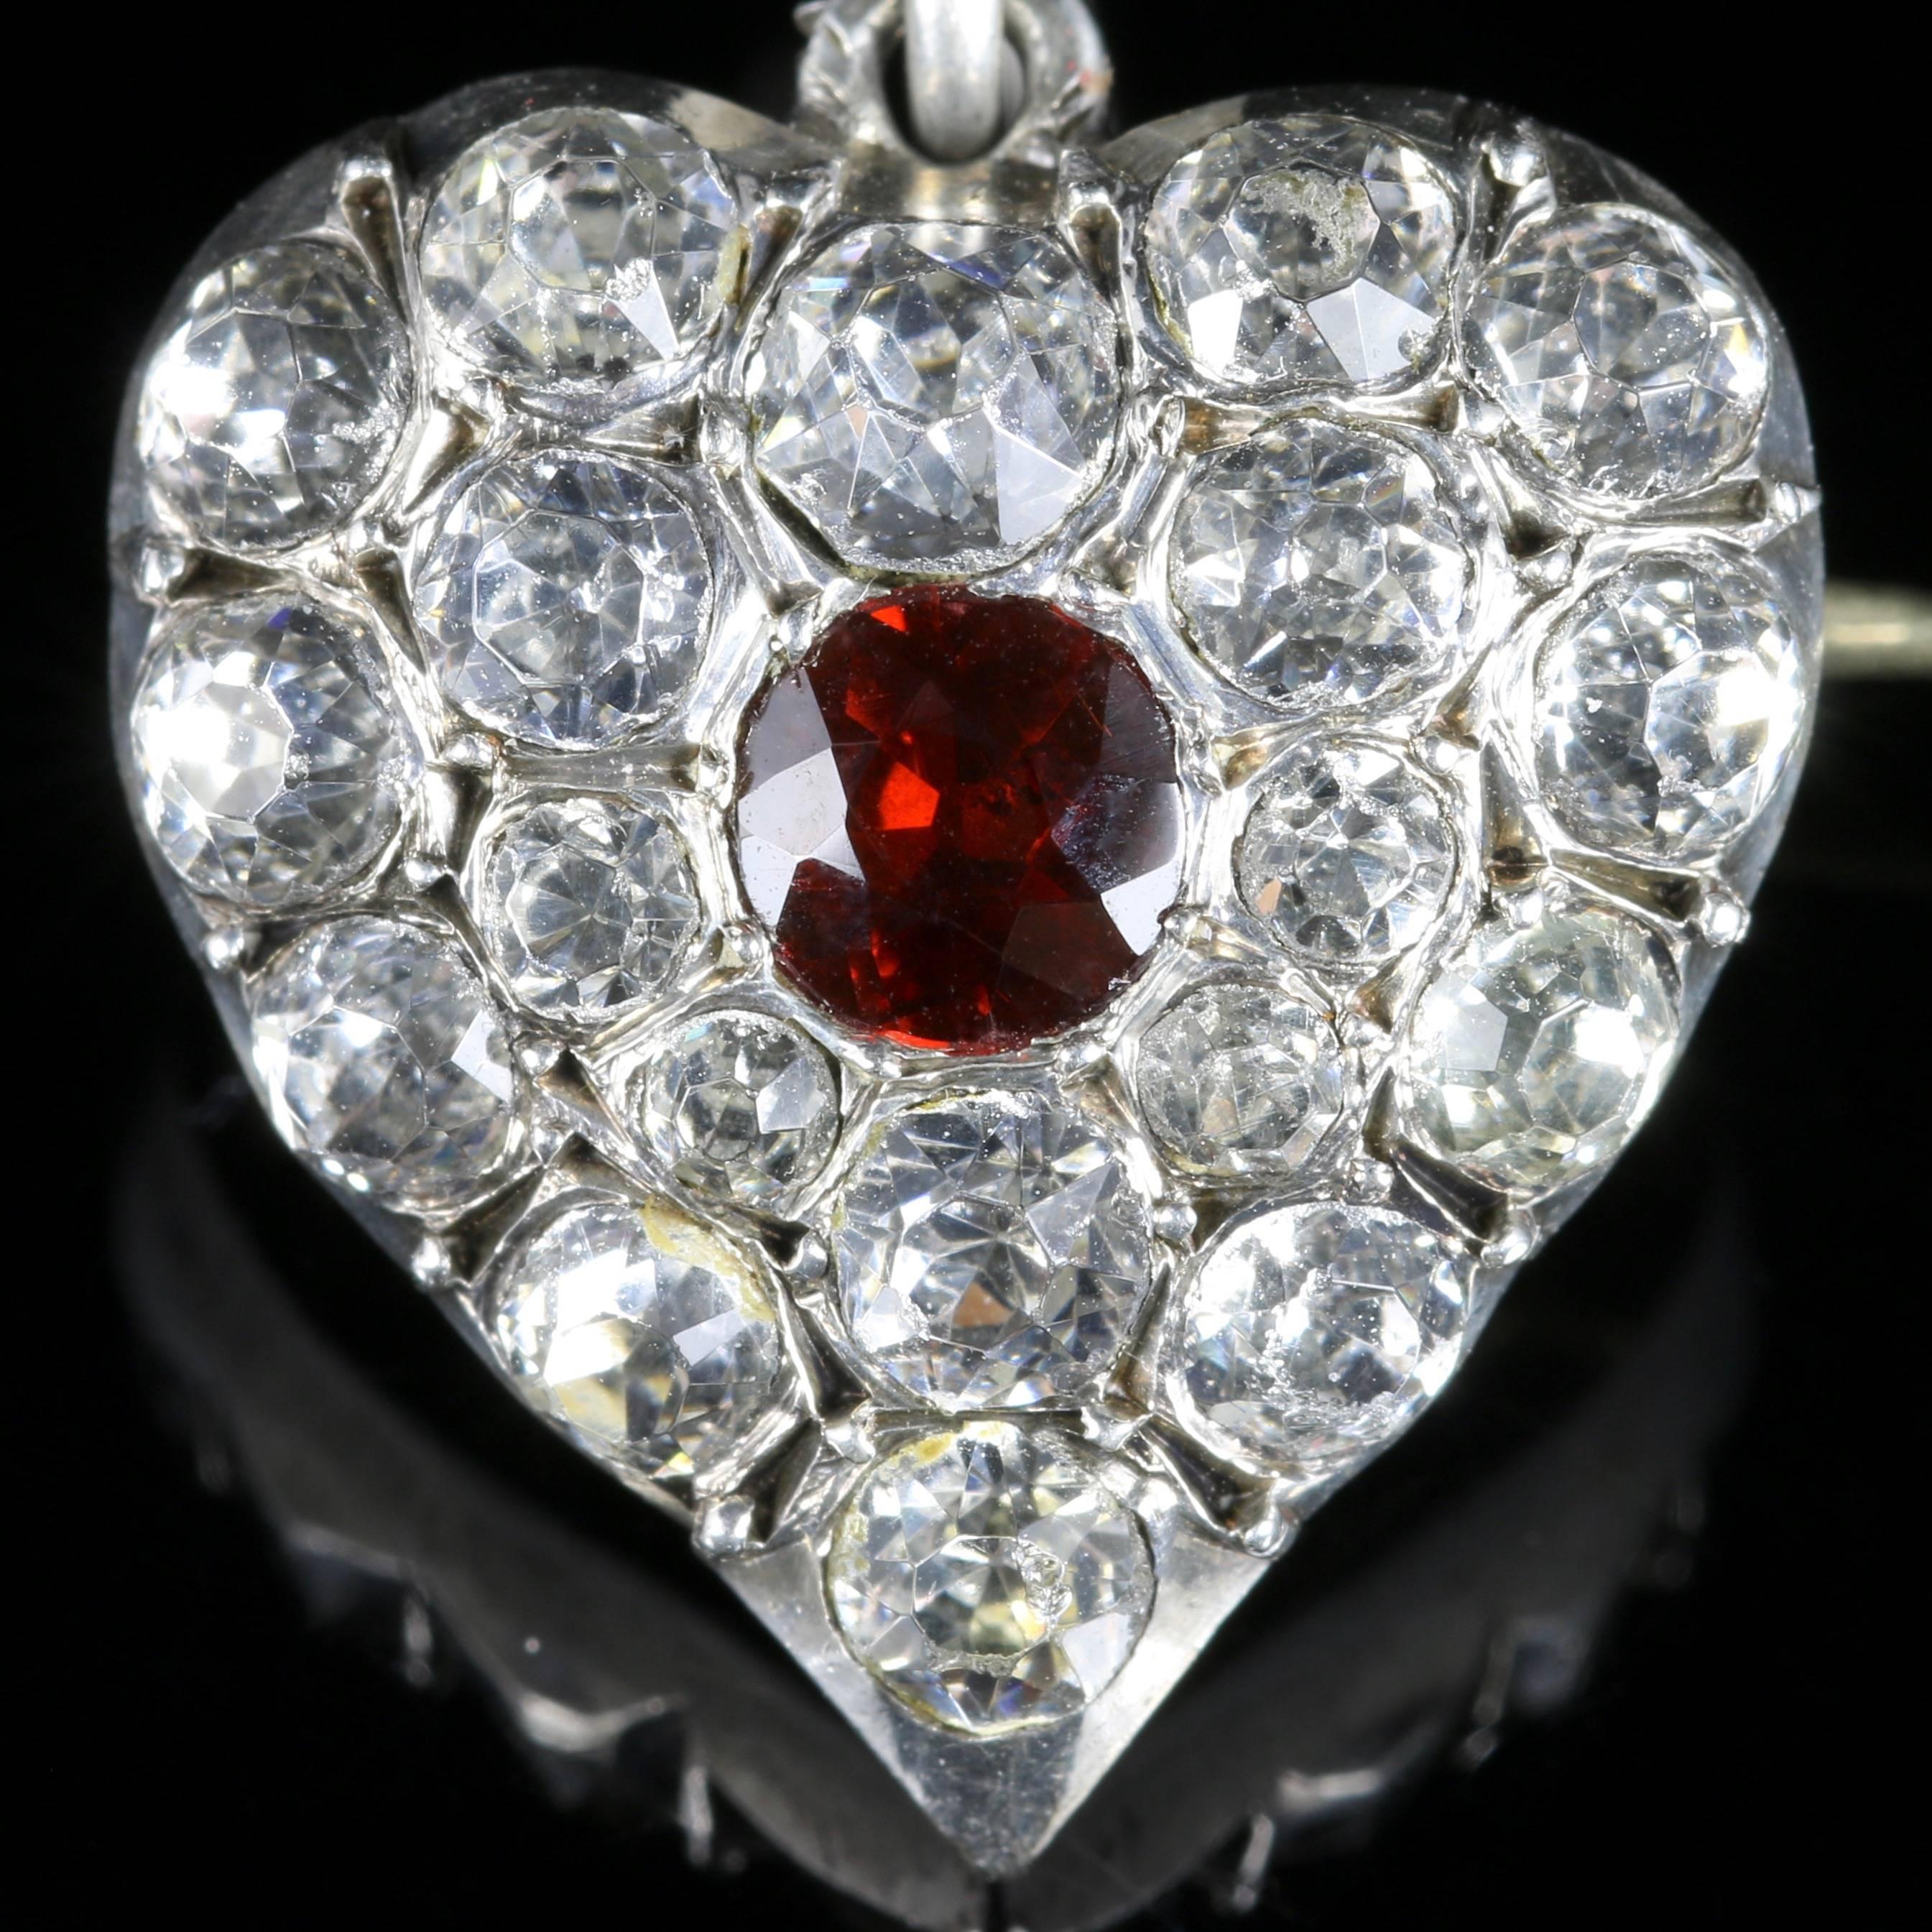 For more details please click continue reading down below...

This fabulous antique Victorian Silver heart shaped Brooch/Pendant is Circa 1900.

The wonderful brooch is adorned with sparkling white Paste Stones and a central rich red Garnet.

The